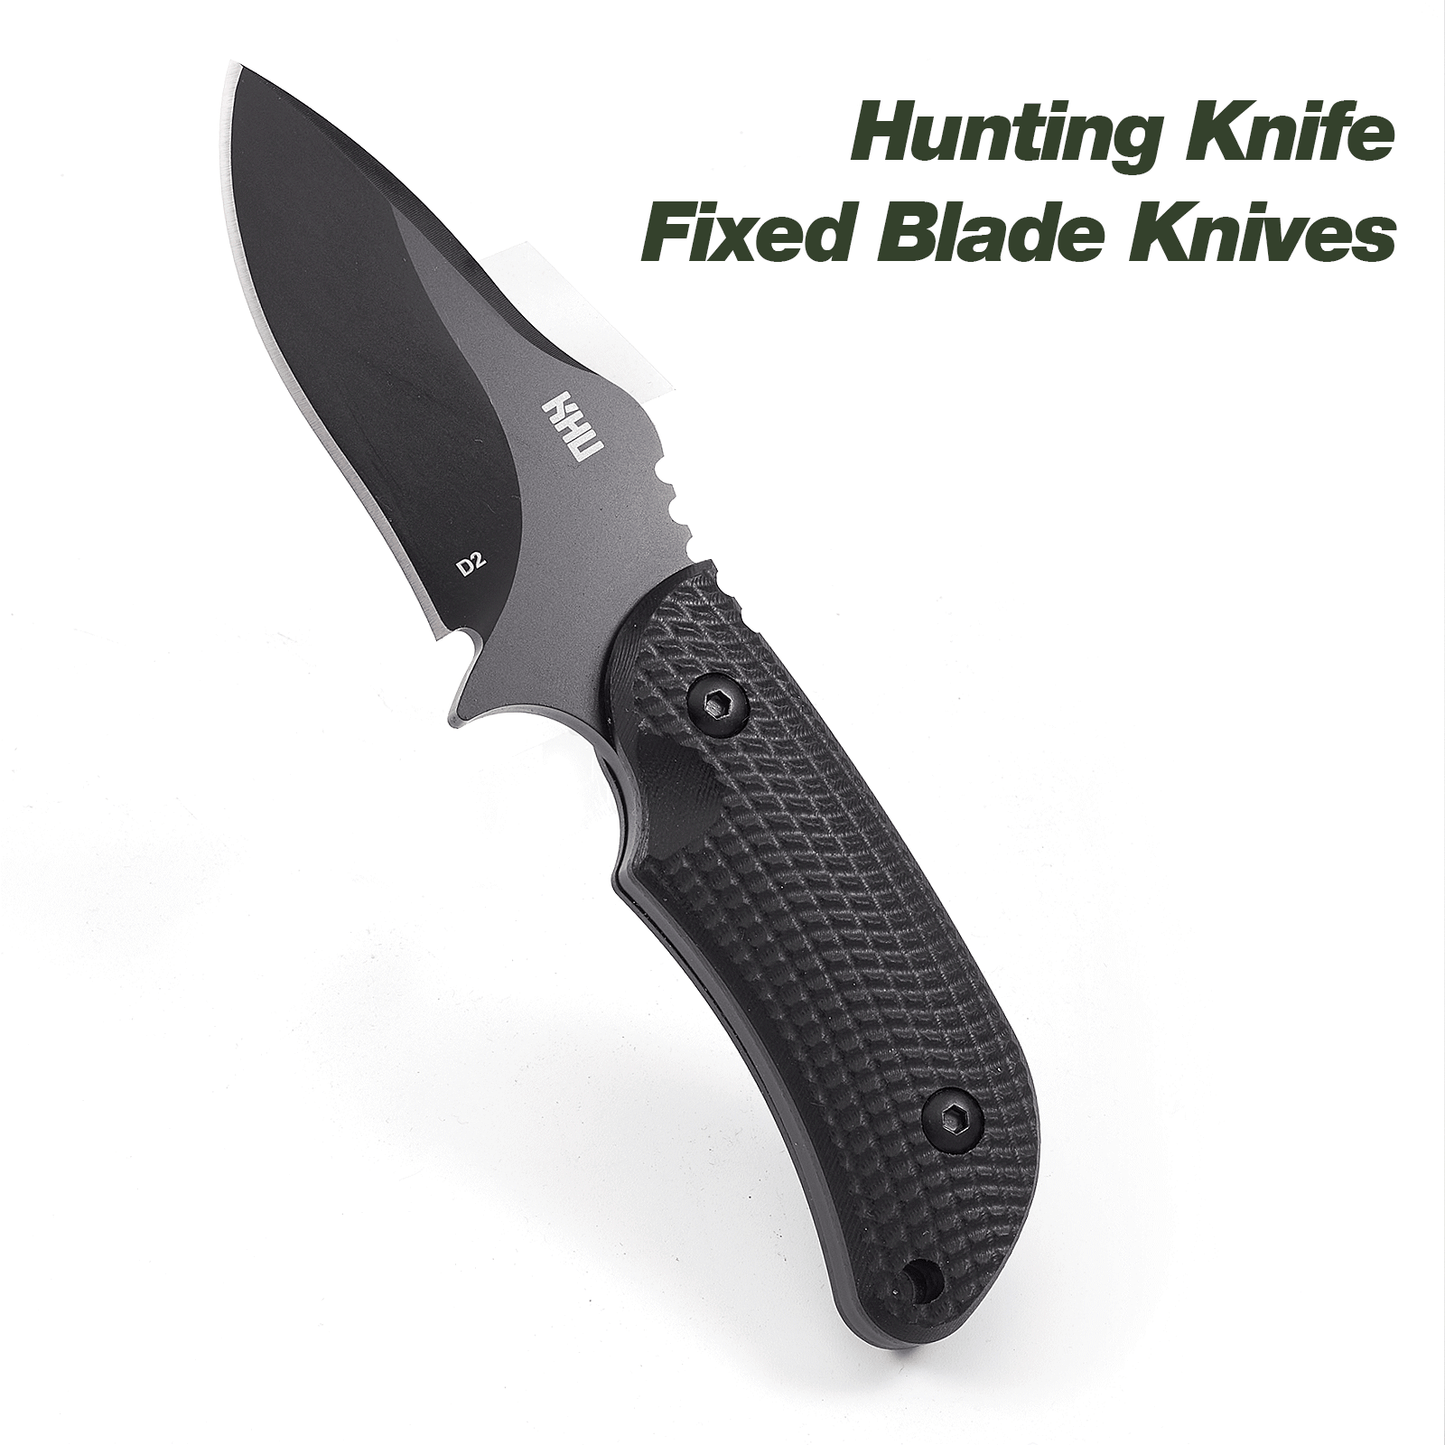 KHU Fixed Blade Knife Tactical, Hunting Knife Survival Knife Camping Knife D2 Steel G10 Handle, Outdoor Hunting Camping Accessories Camping Gear With Kydex Sheath